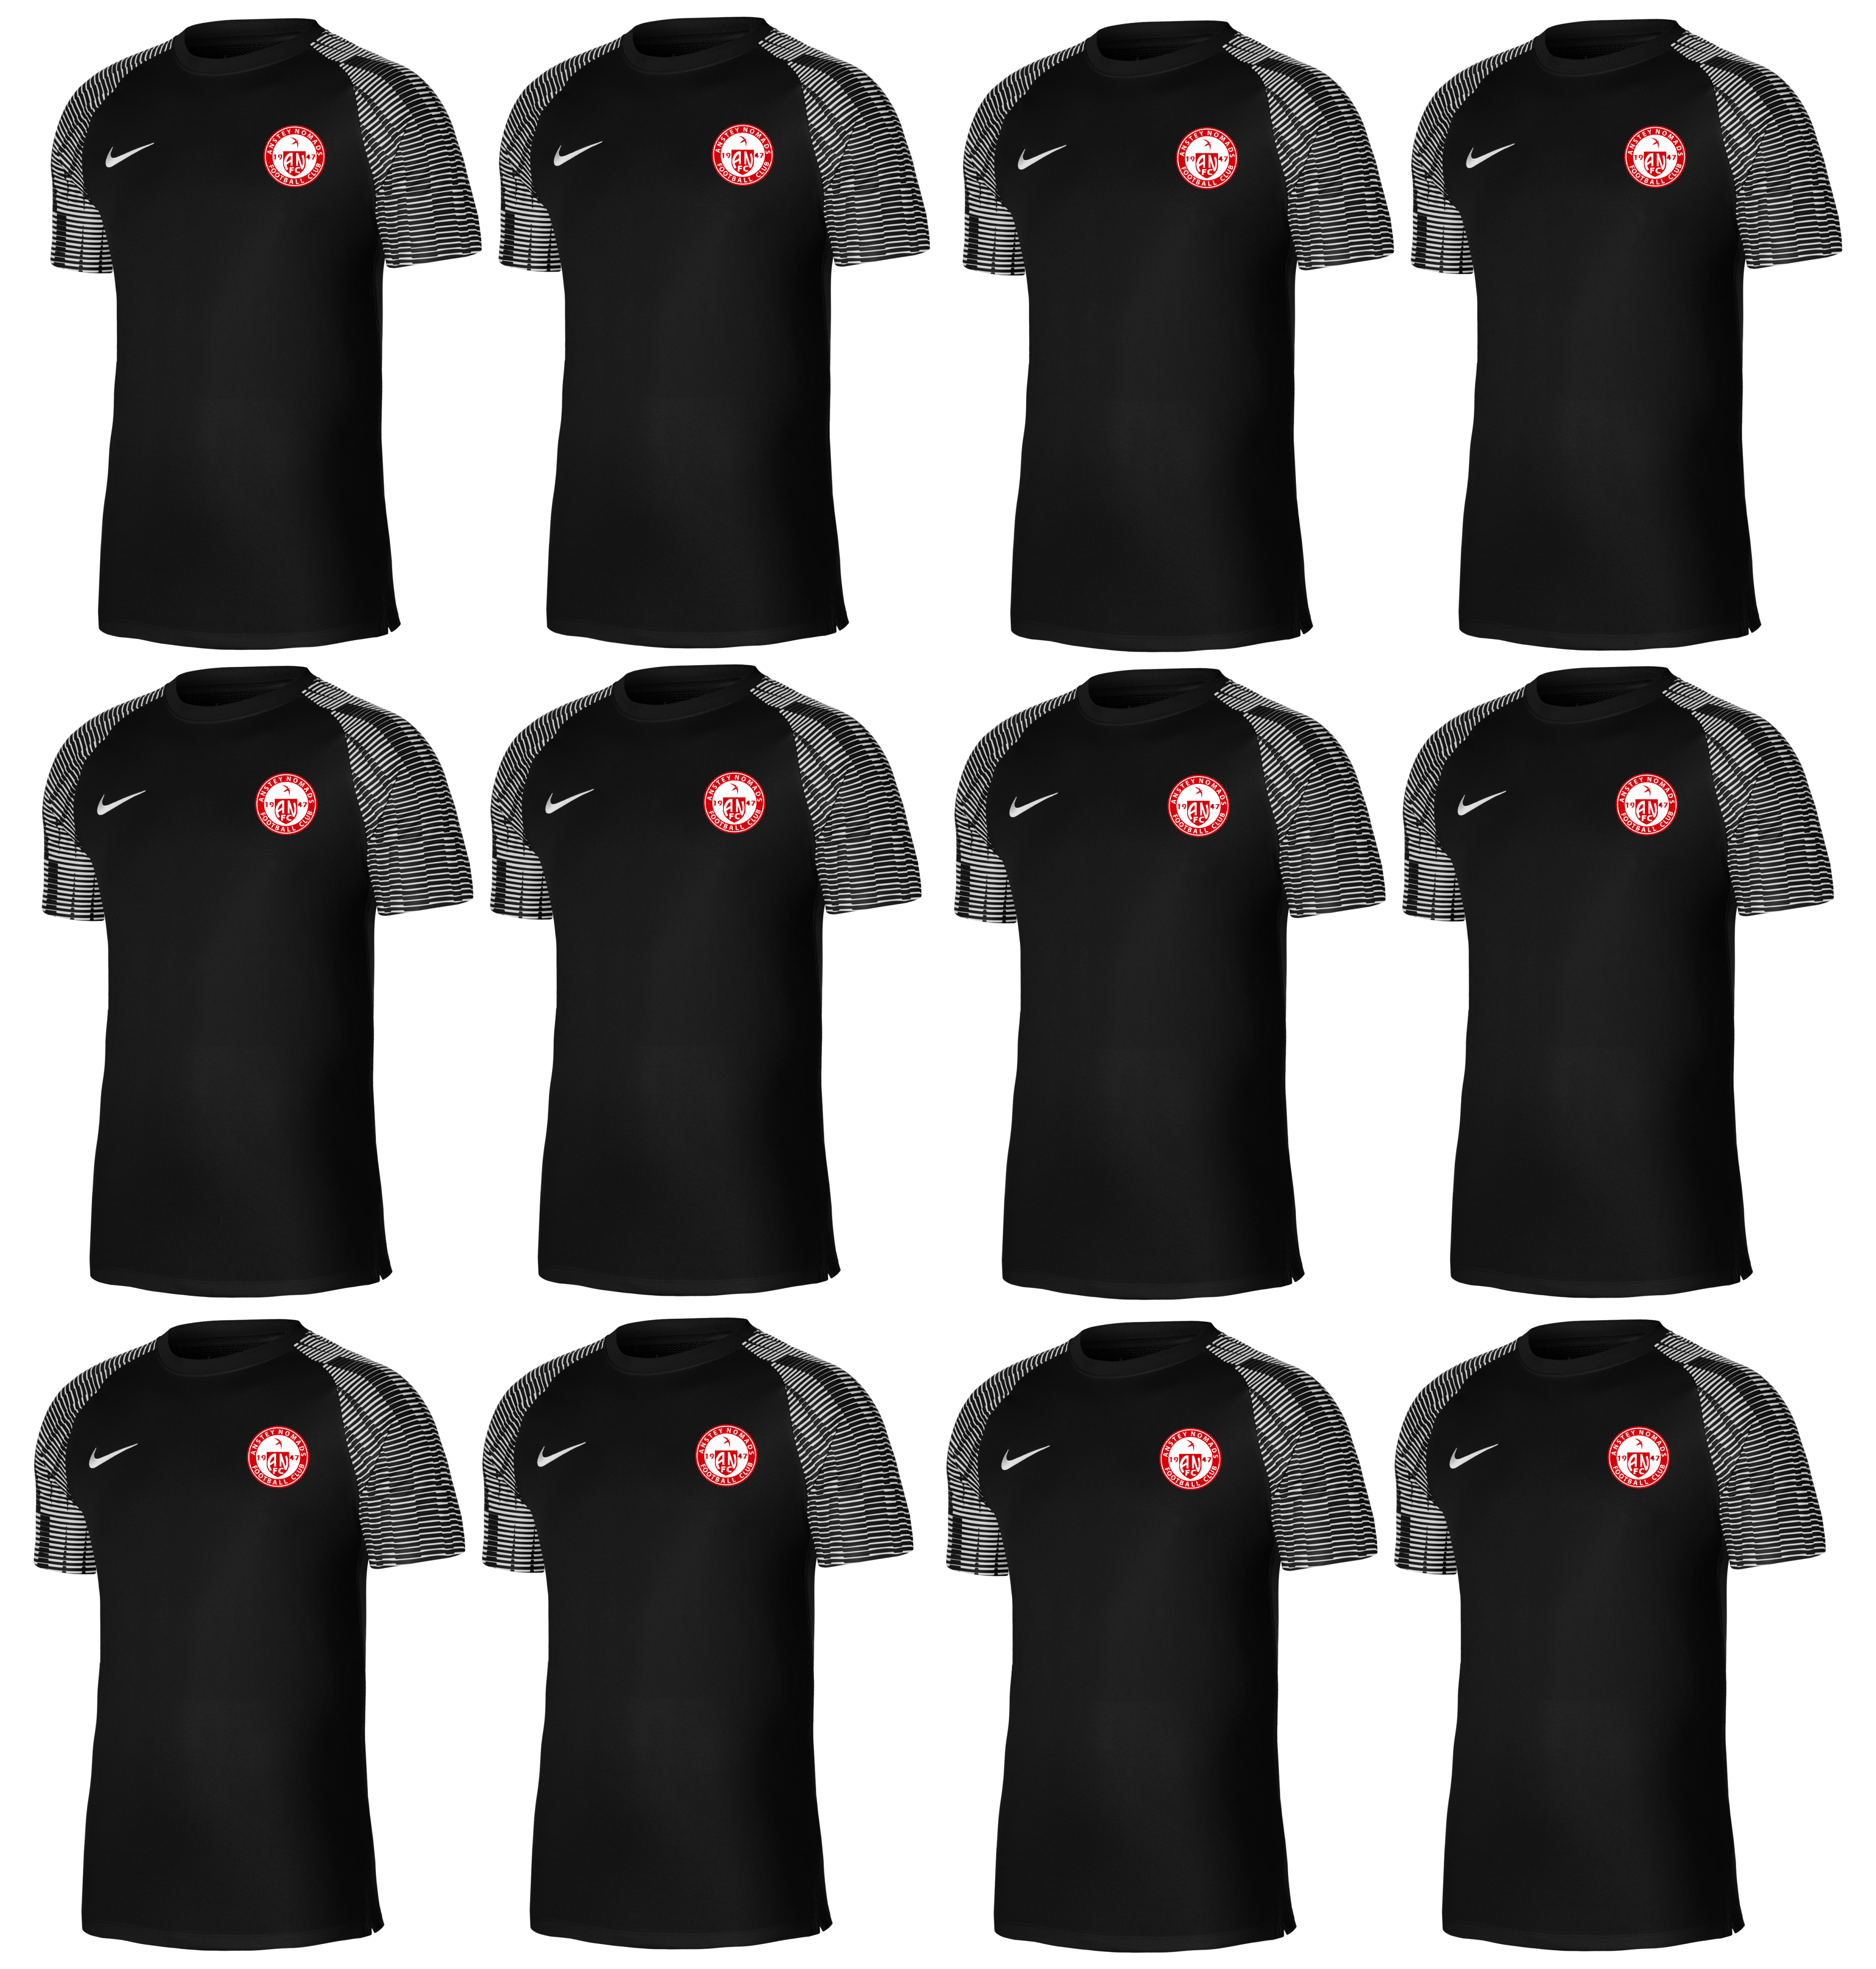 Anstey Nomads - Youth Training Top Bundle 2 (12 Tops)